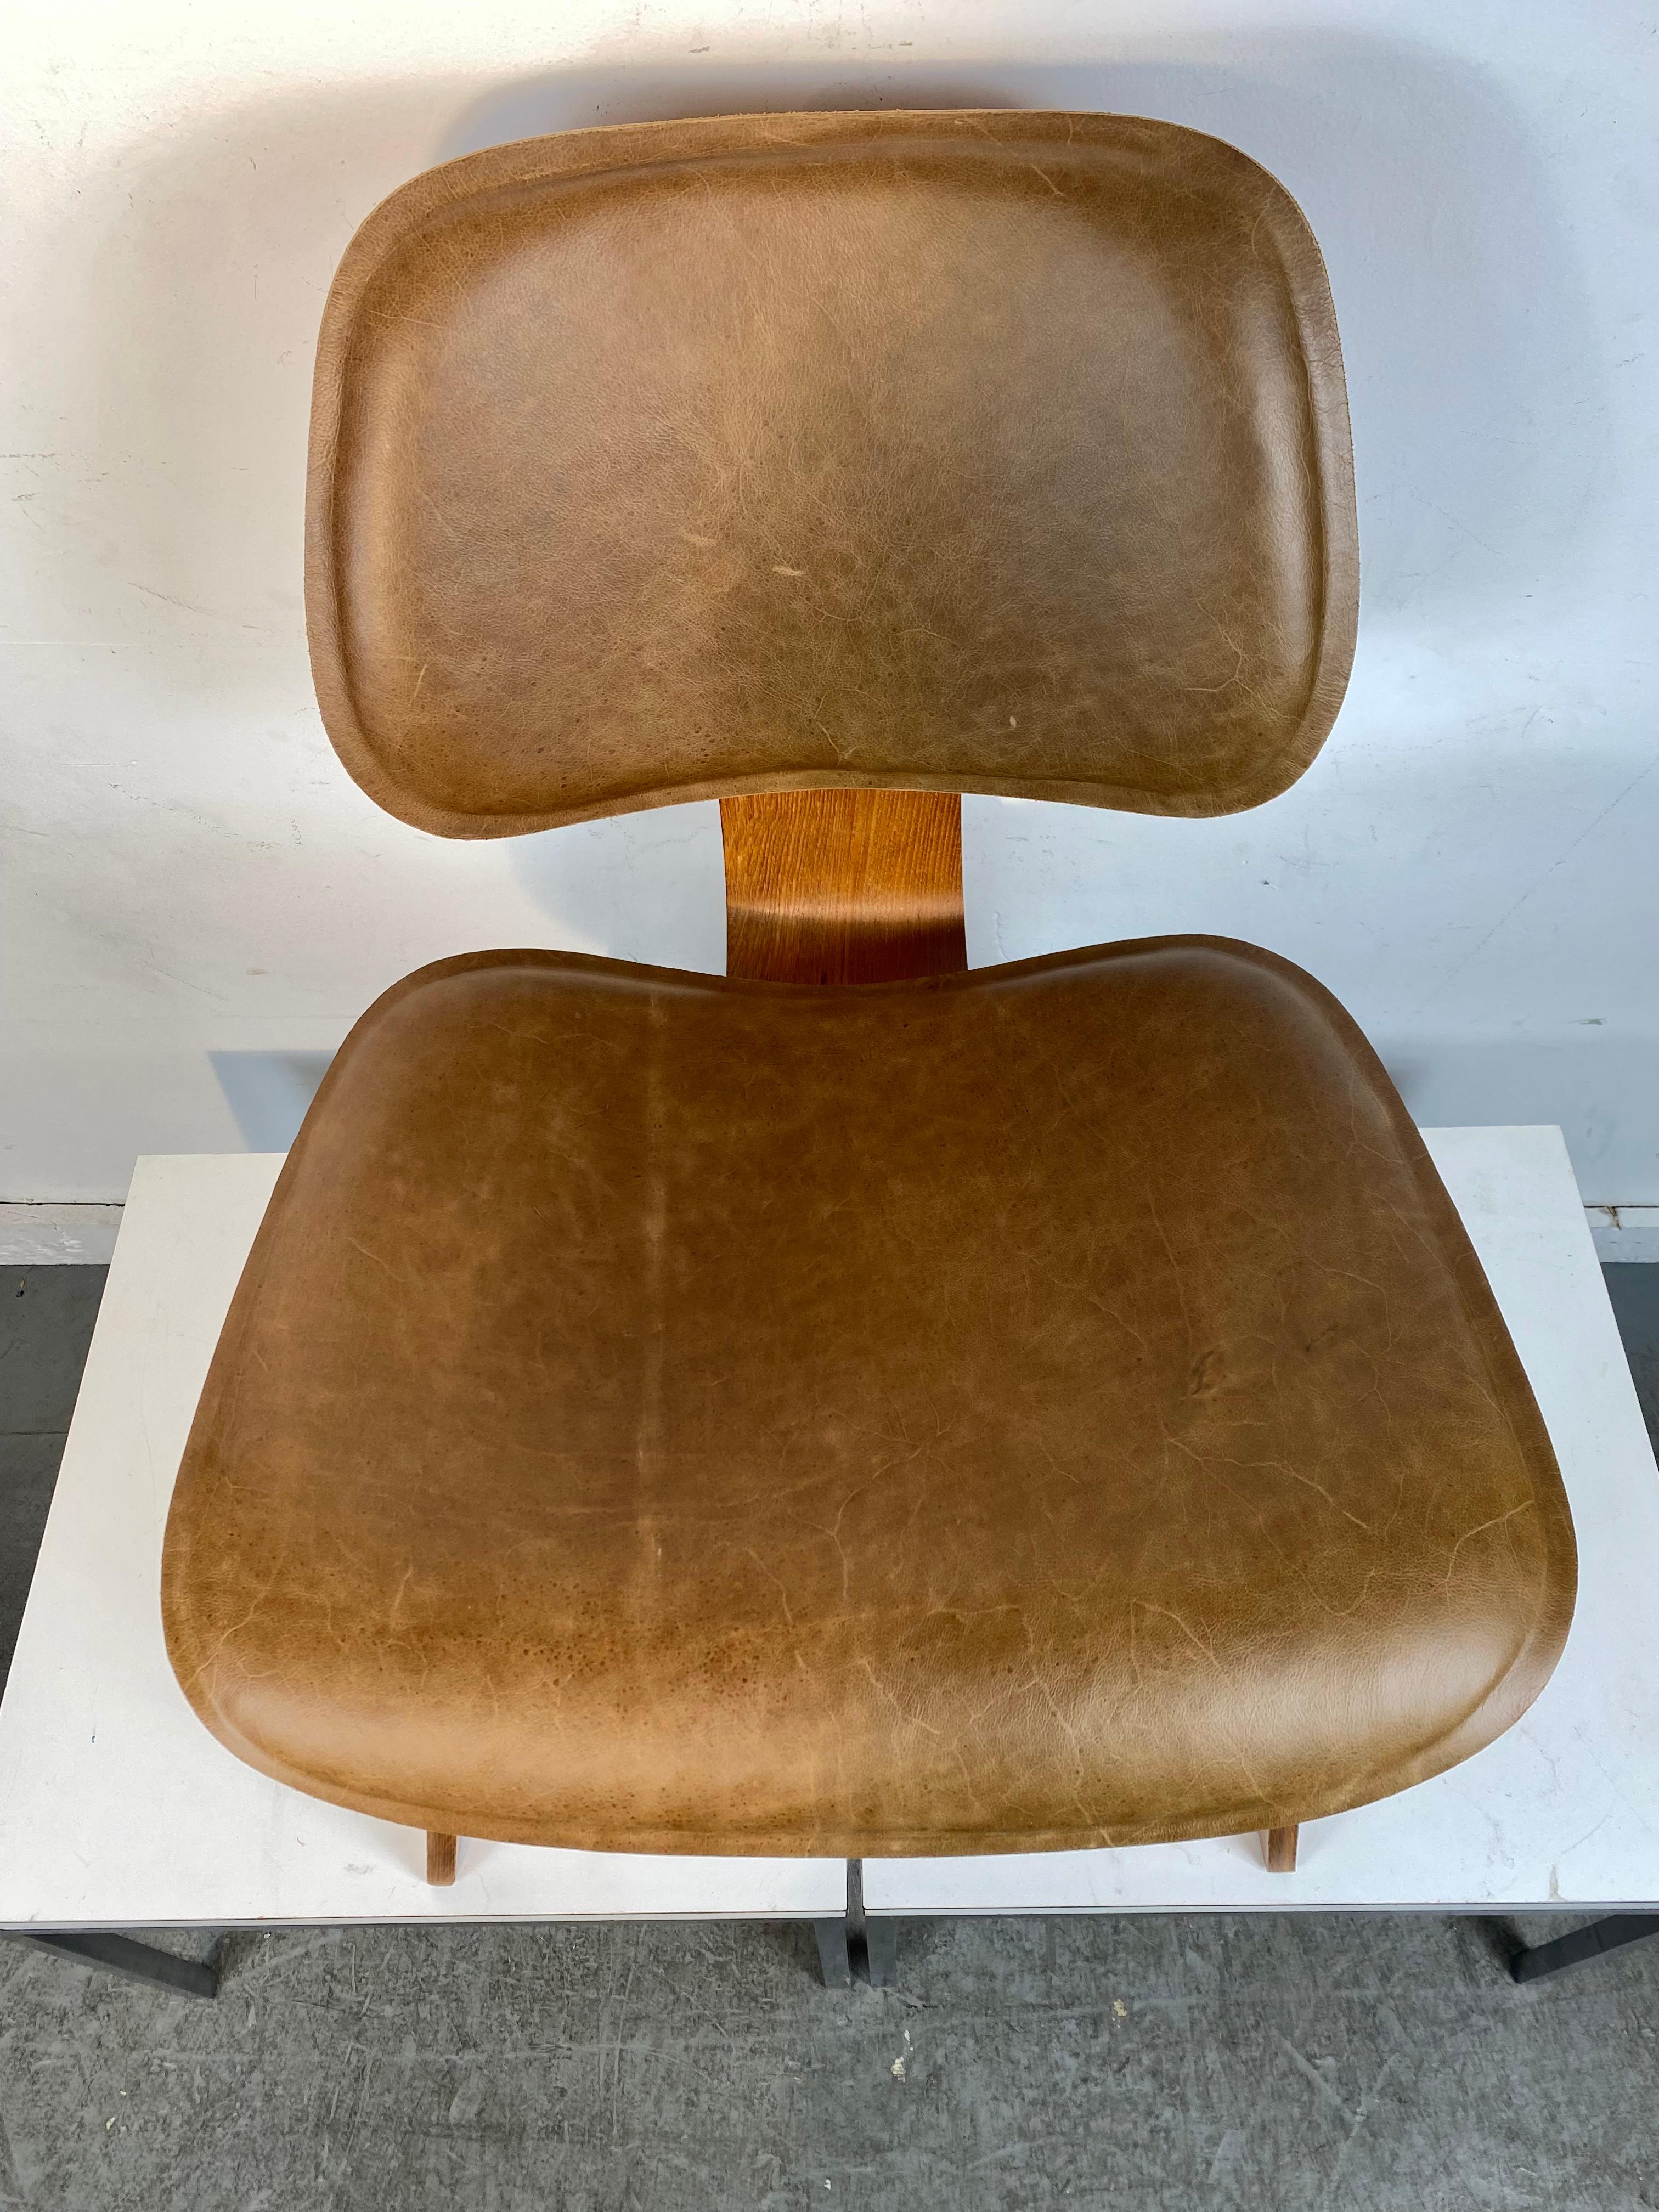 Mid-20th Century Charles Eames L C W (LOUNGE CHAIR) Leather seat and back, Modernist Herman Miller